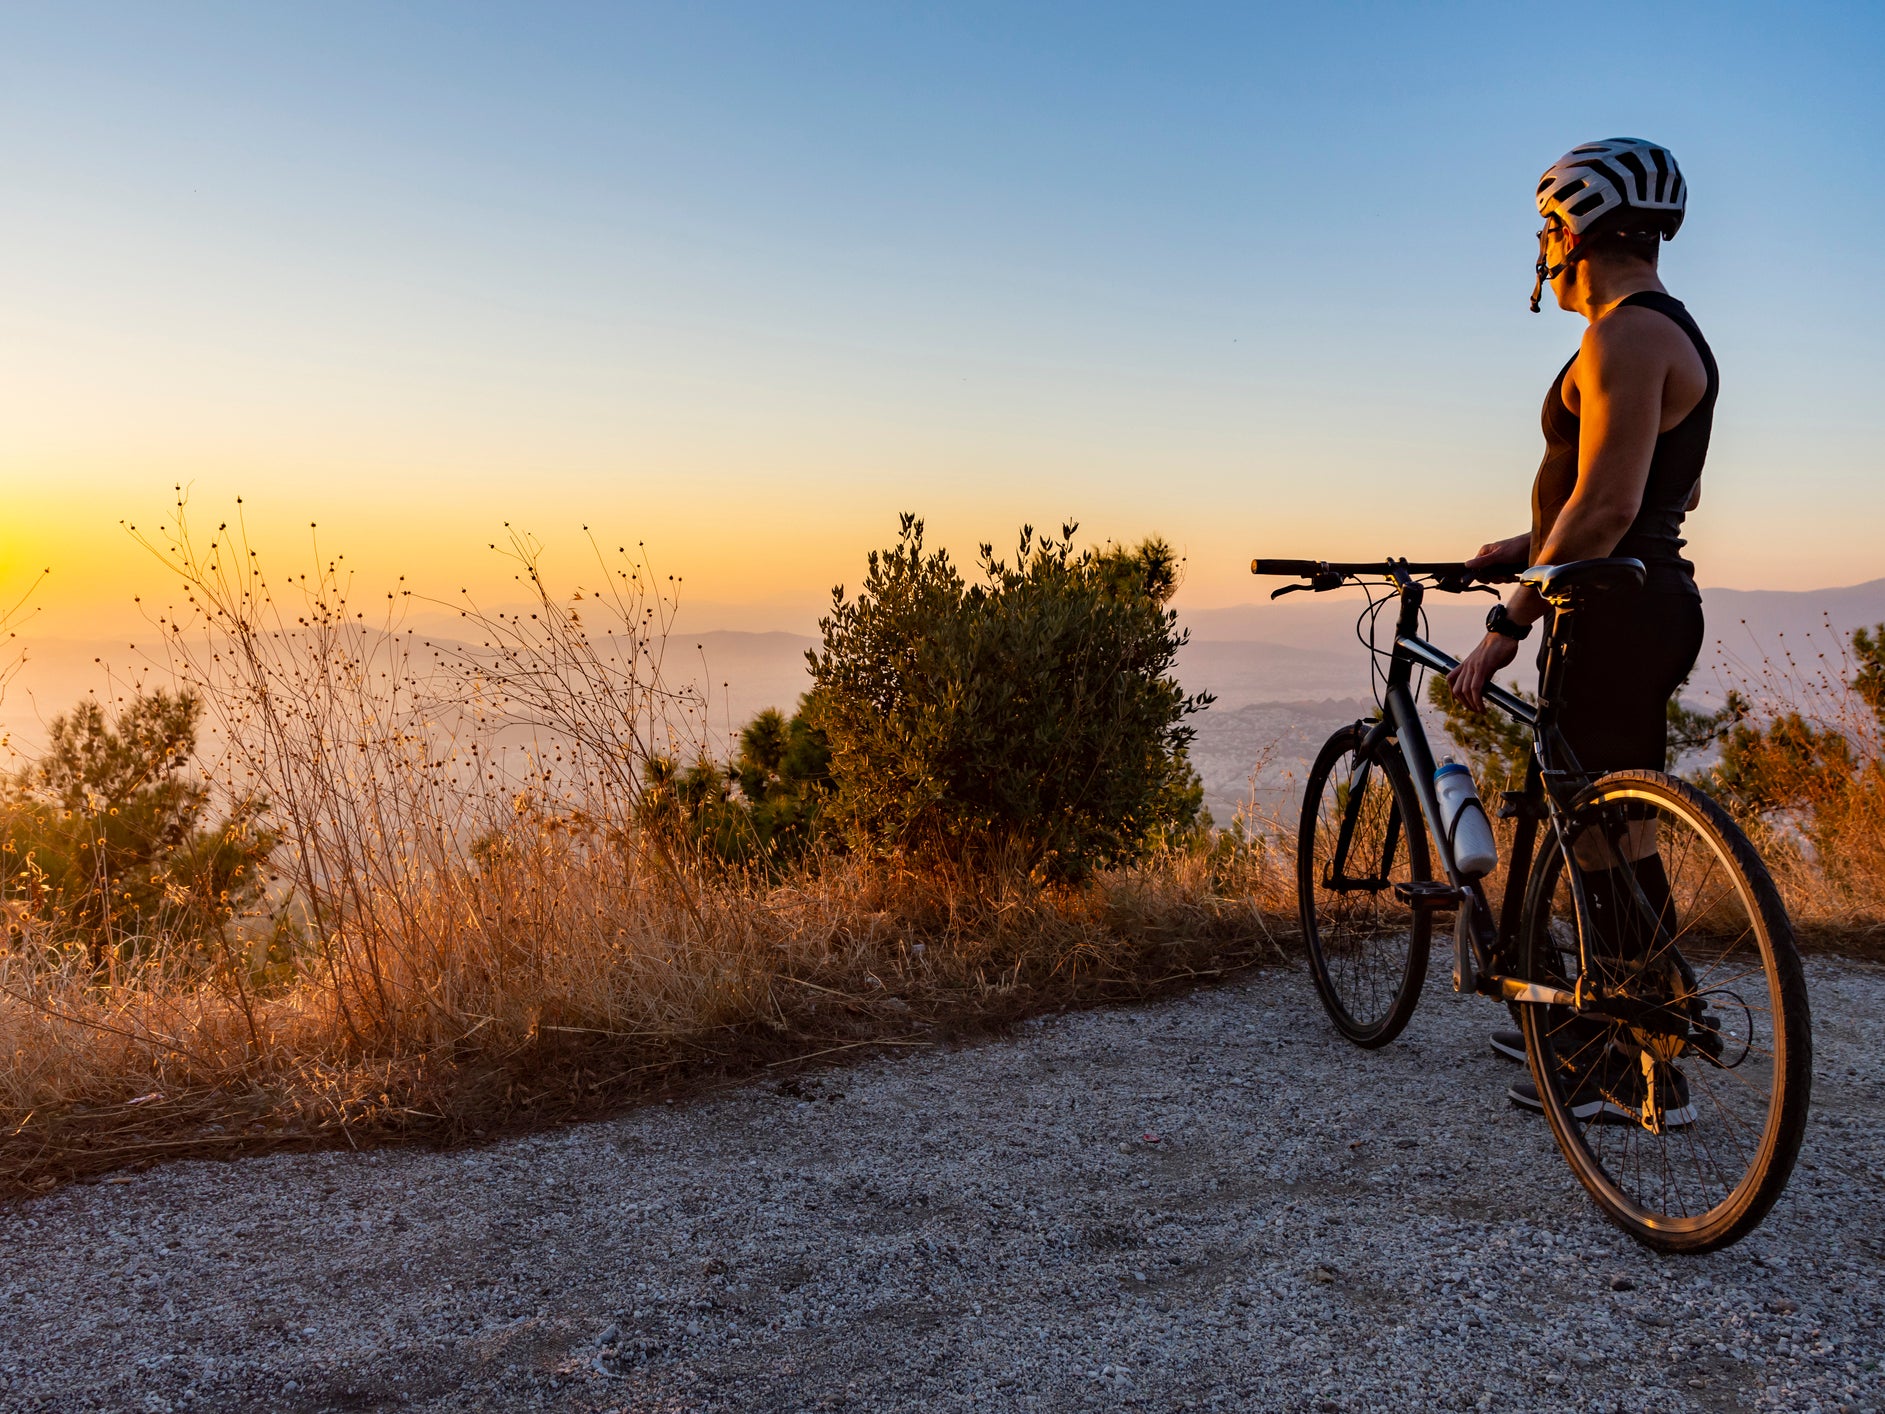 A cyclist watches the sun set in Greece